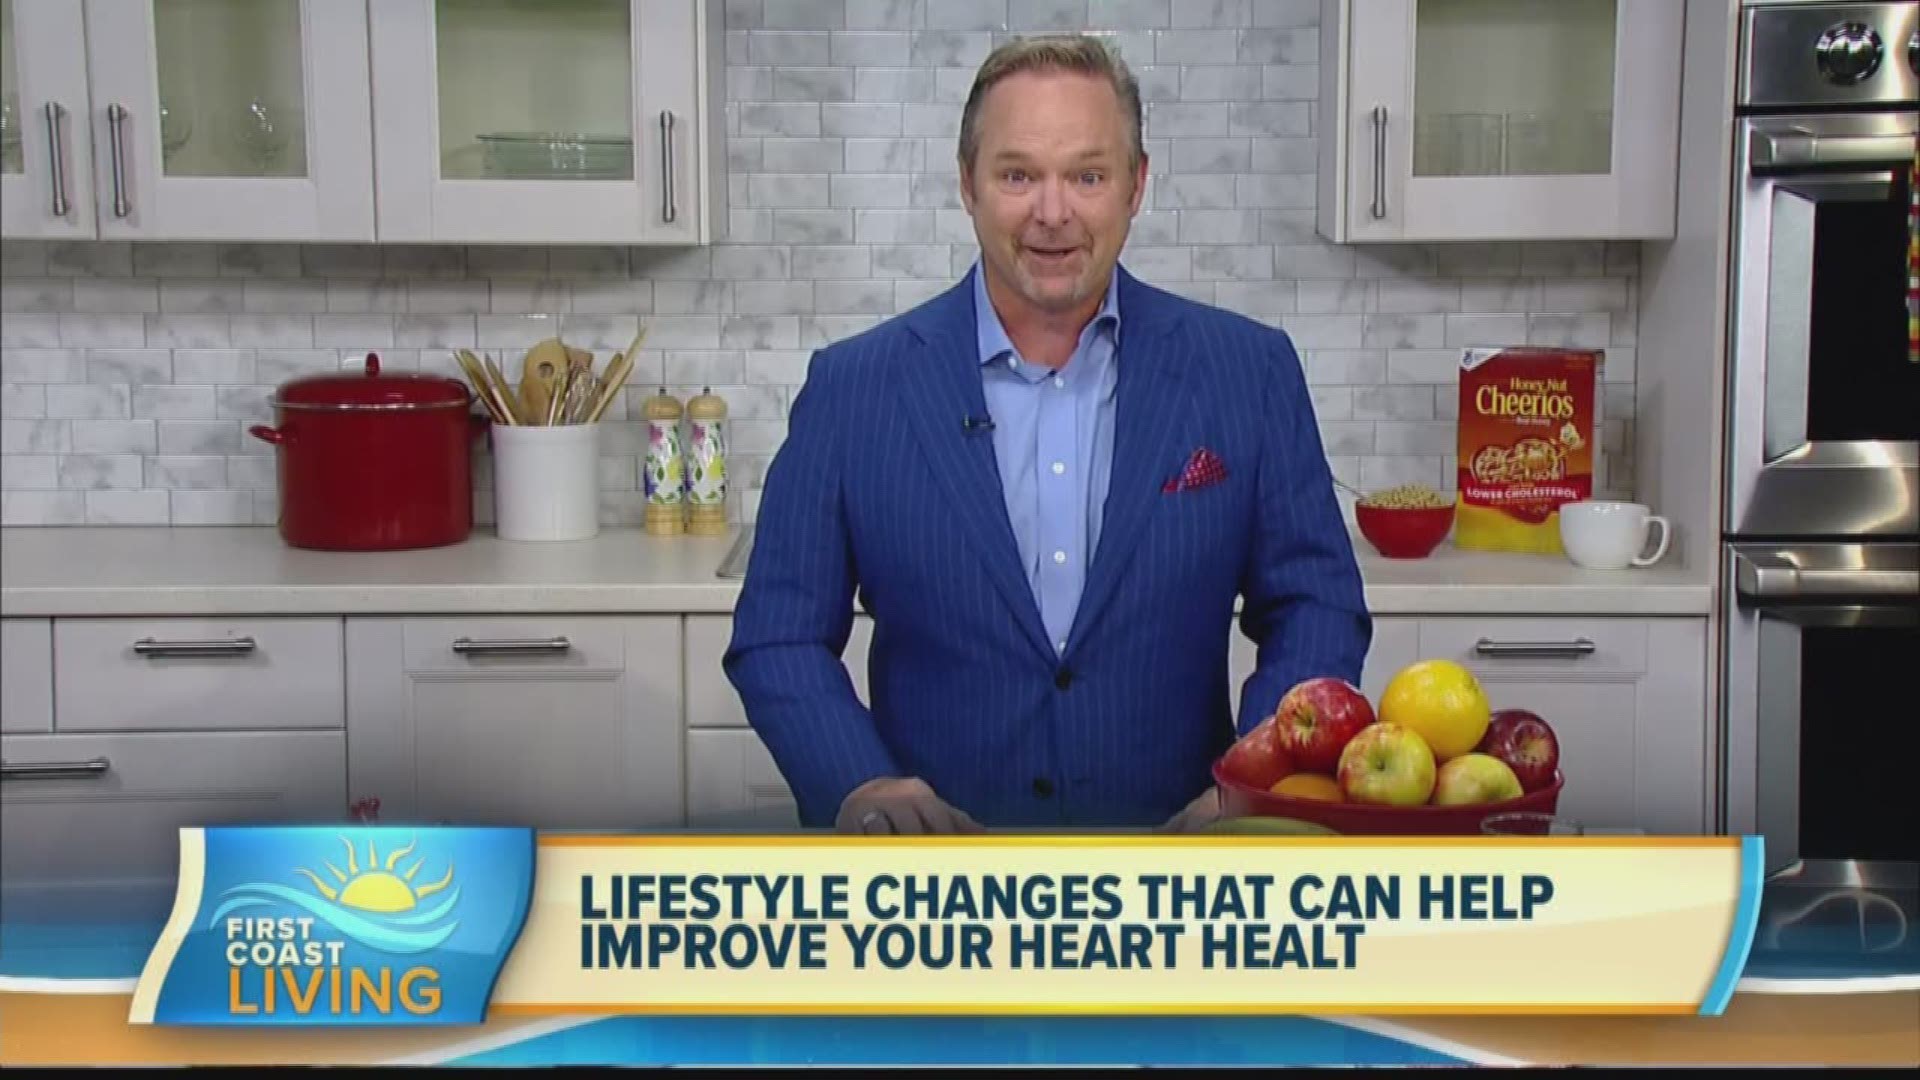 Learn a few minor and fun changes you can make that can help you get on the road to heart health